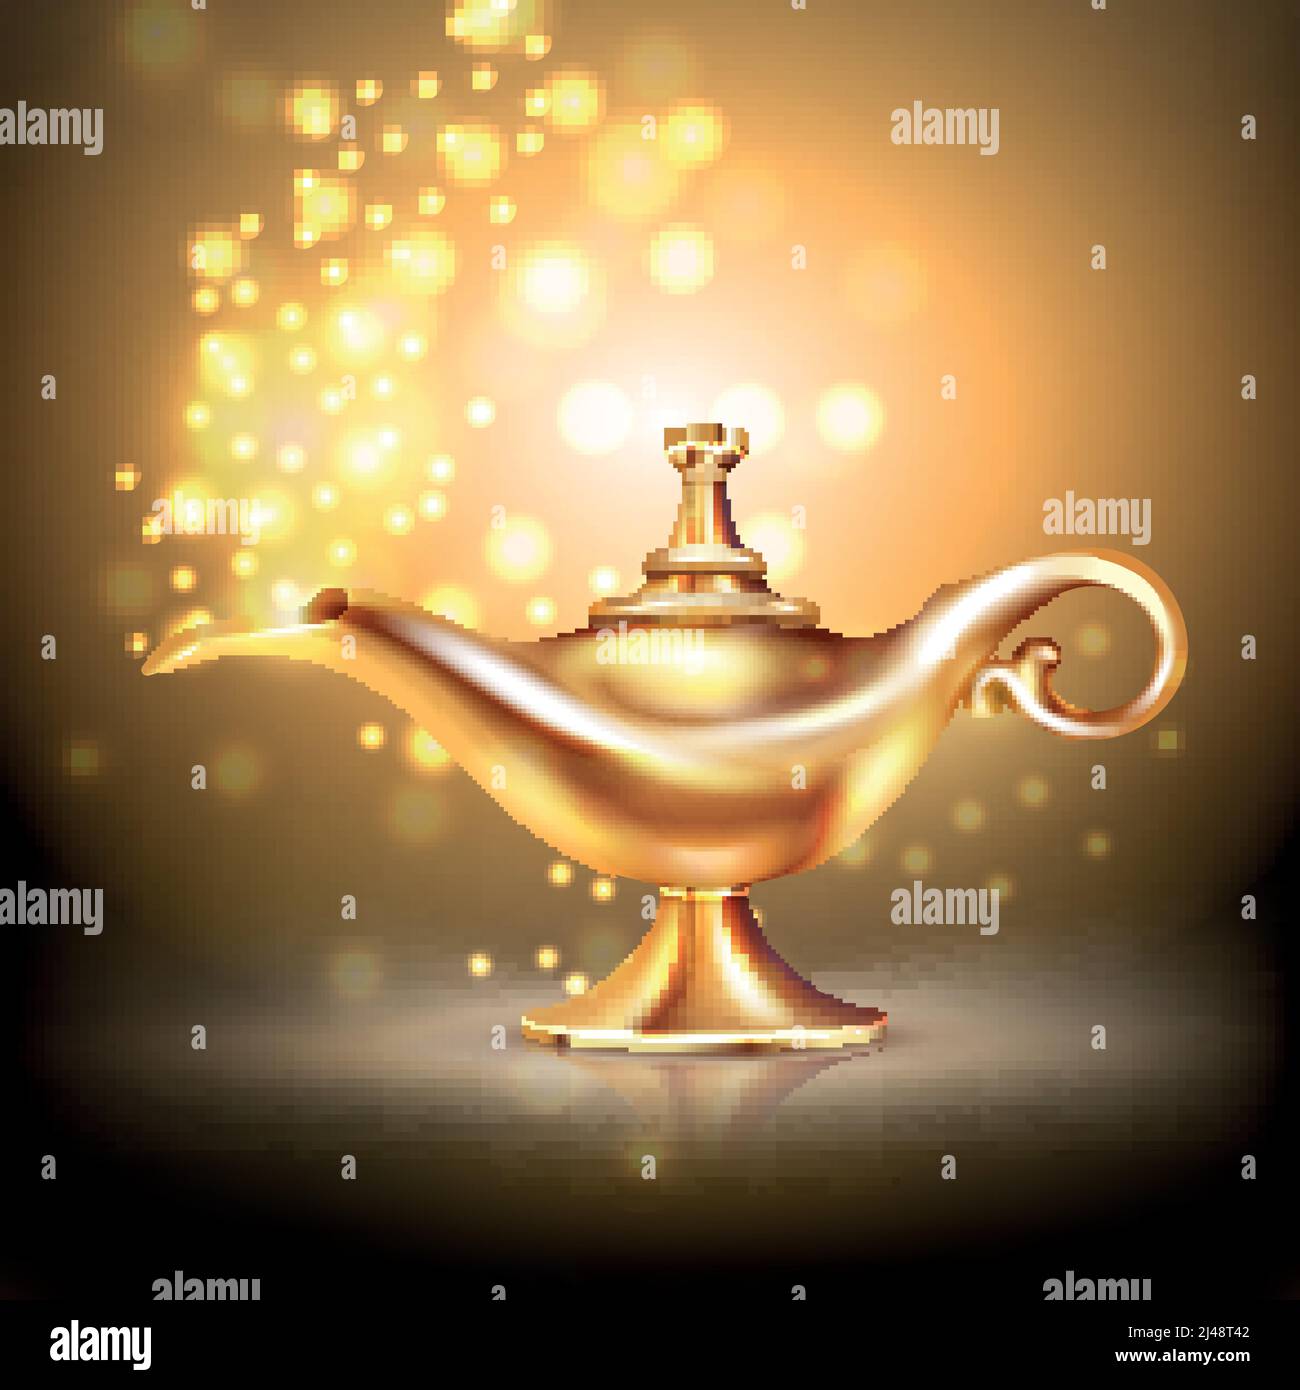 Aladdin lamp composition with luminous particles  lighting effects and oriental style vessel made of gold vector illustration Stock Vector